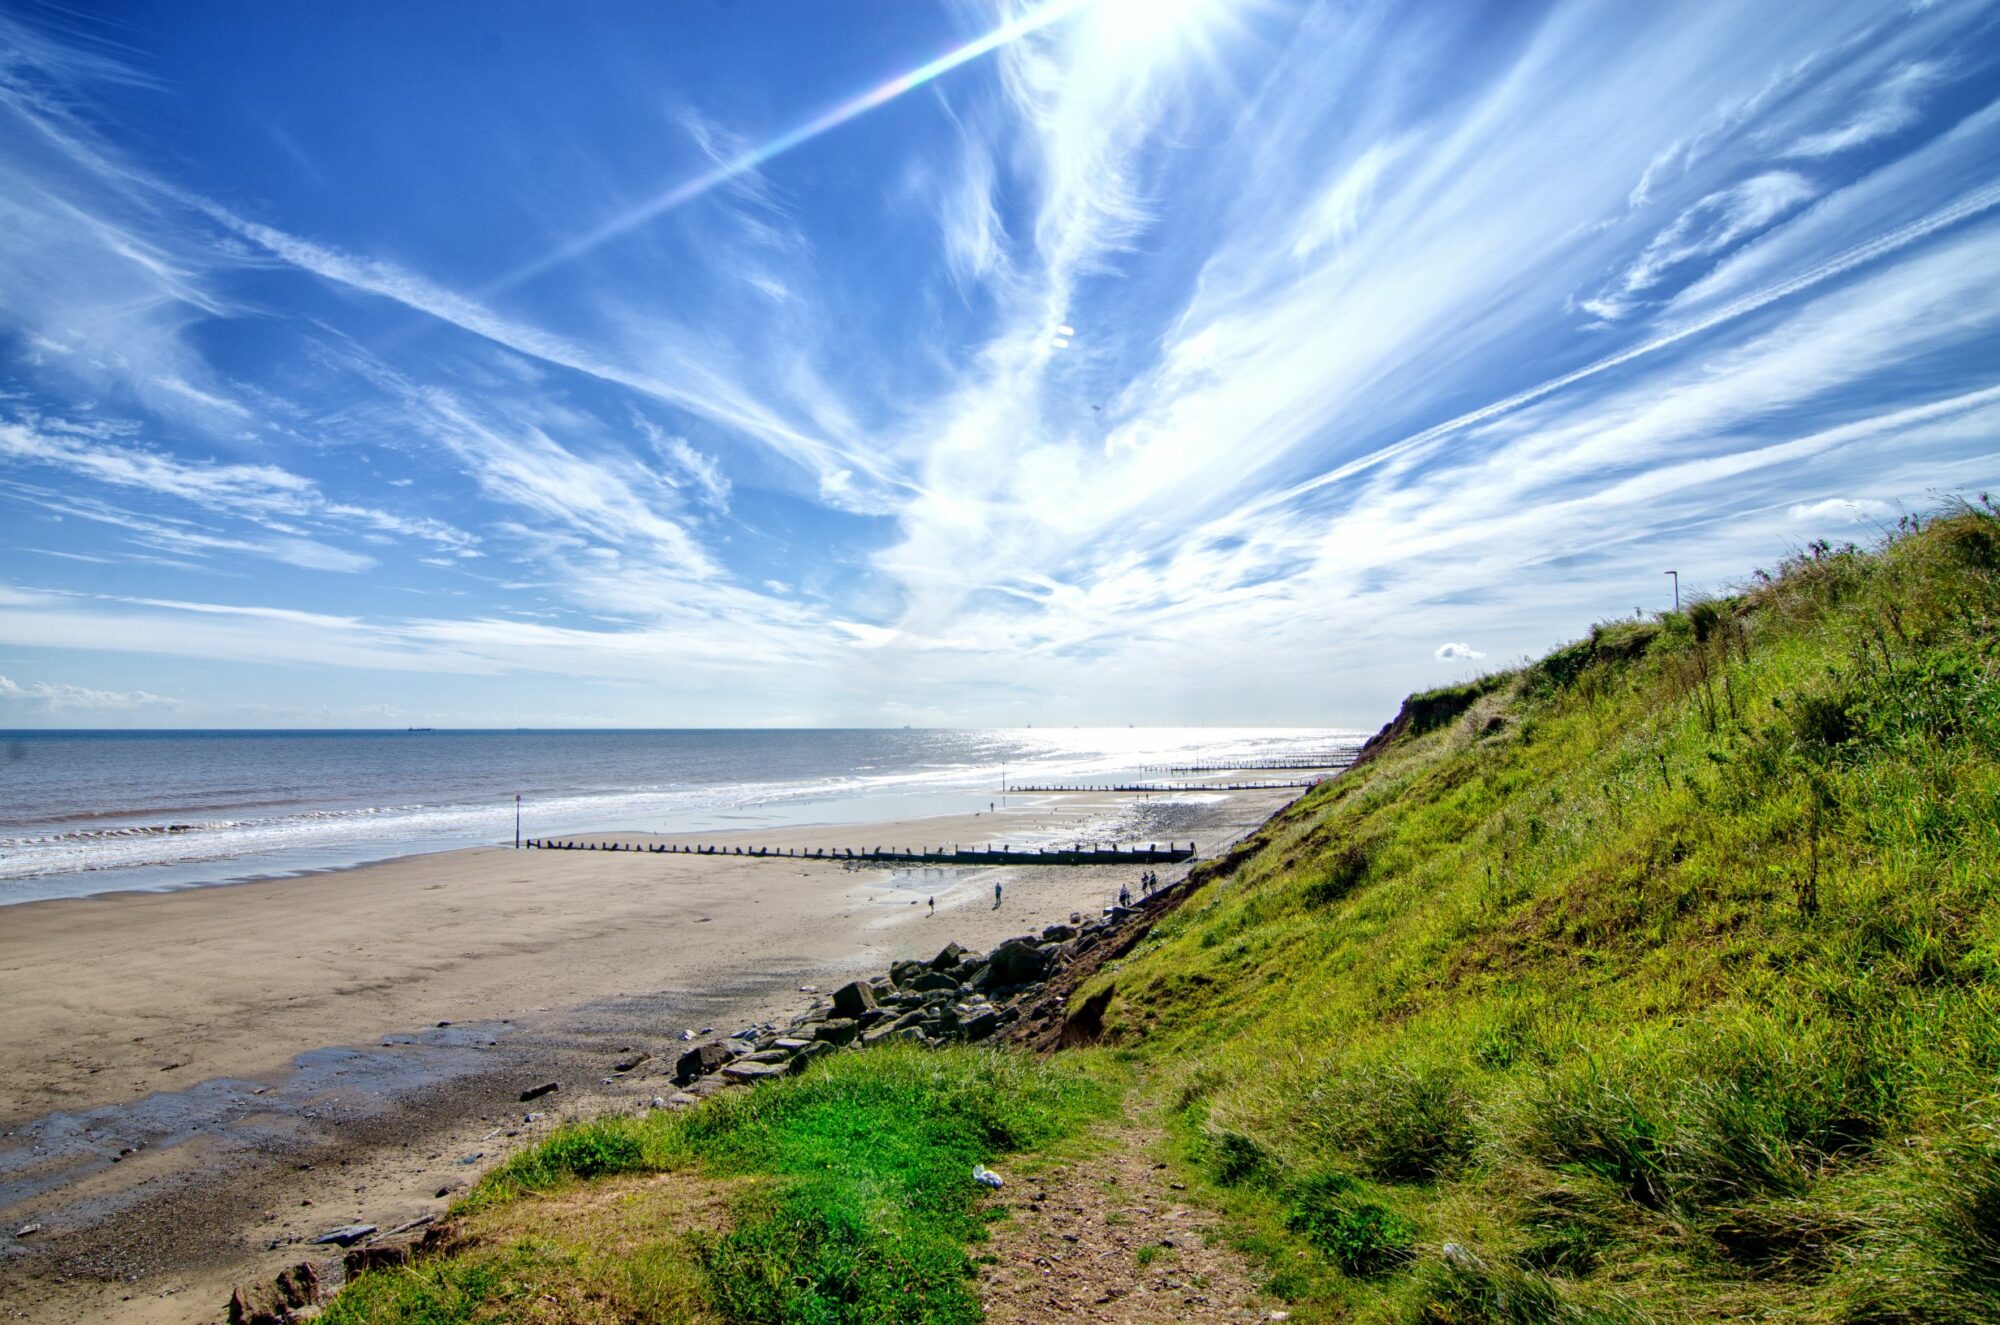 Image name shutterstock1321198748 1 the 31 image from the post Withernsea in Yorkshire.com.